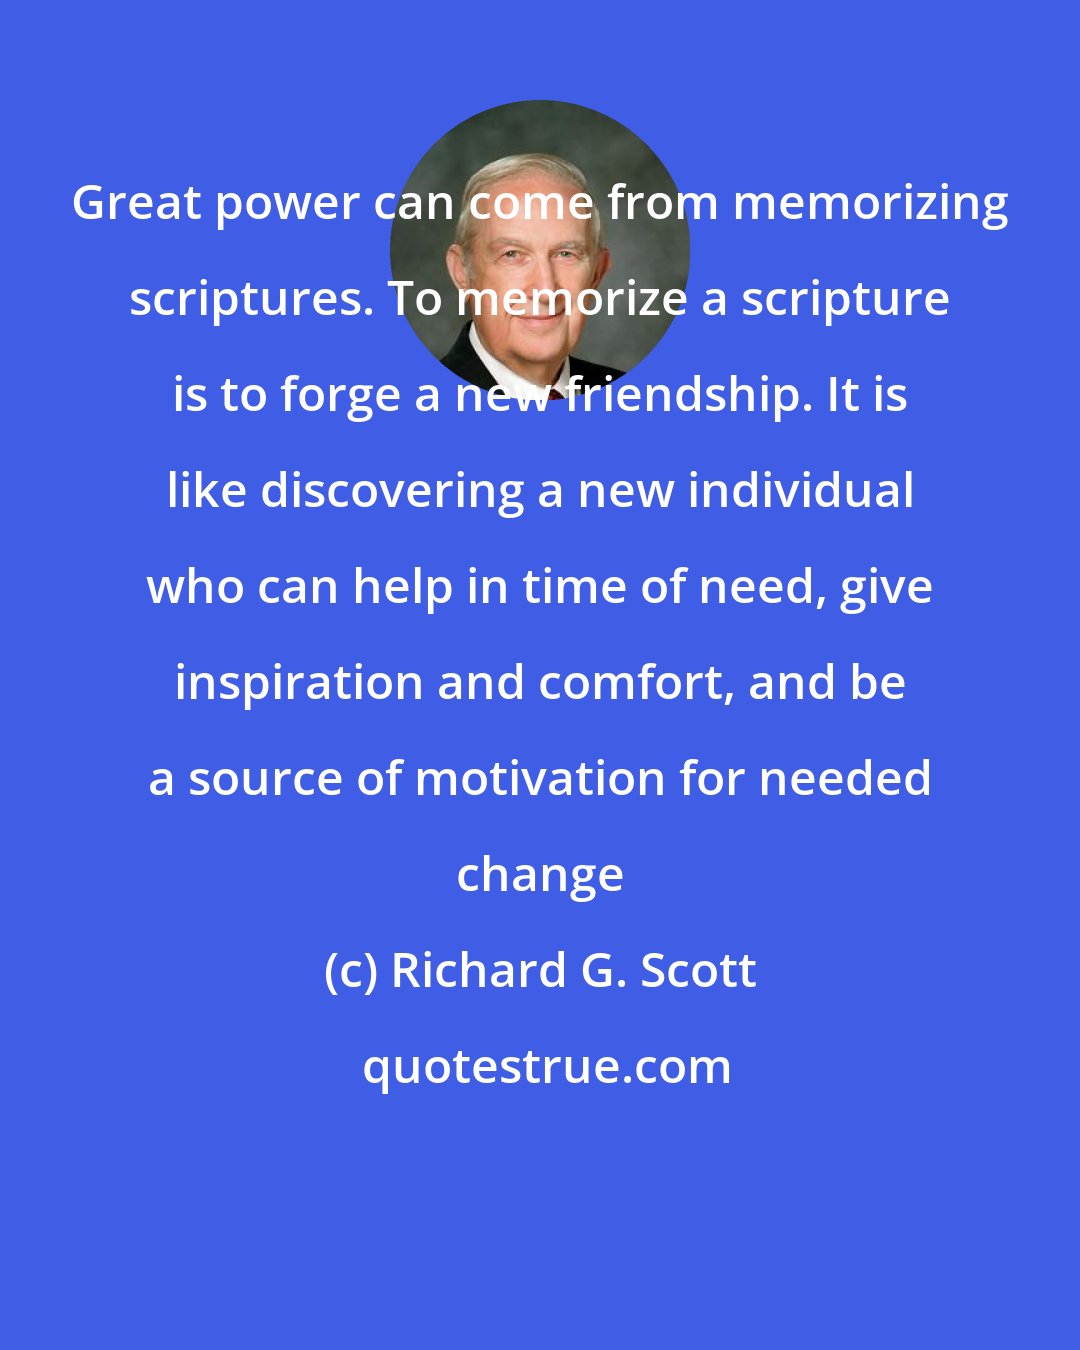 Richard G. Scott: Great power can come from memorizing scriptures. To memorize a scripture is to forge a new friendship. It is like discovering a new individual who can help in time of need, give inspiration and comfort, and be a source of motivation for needed change